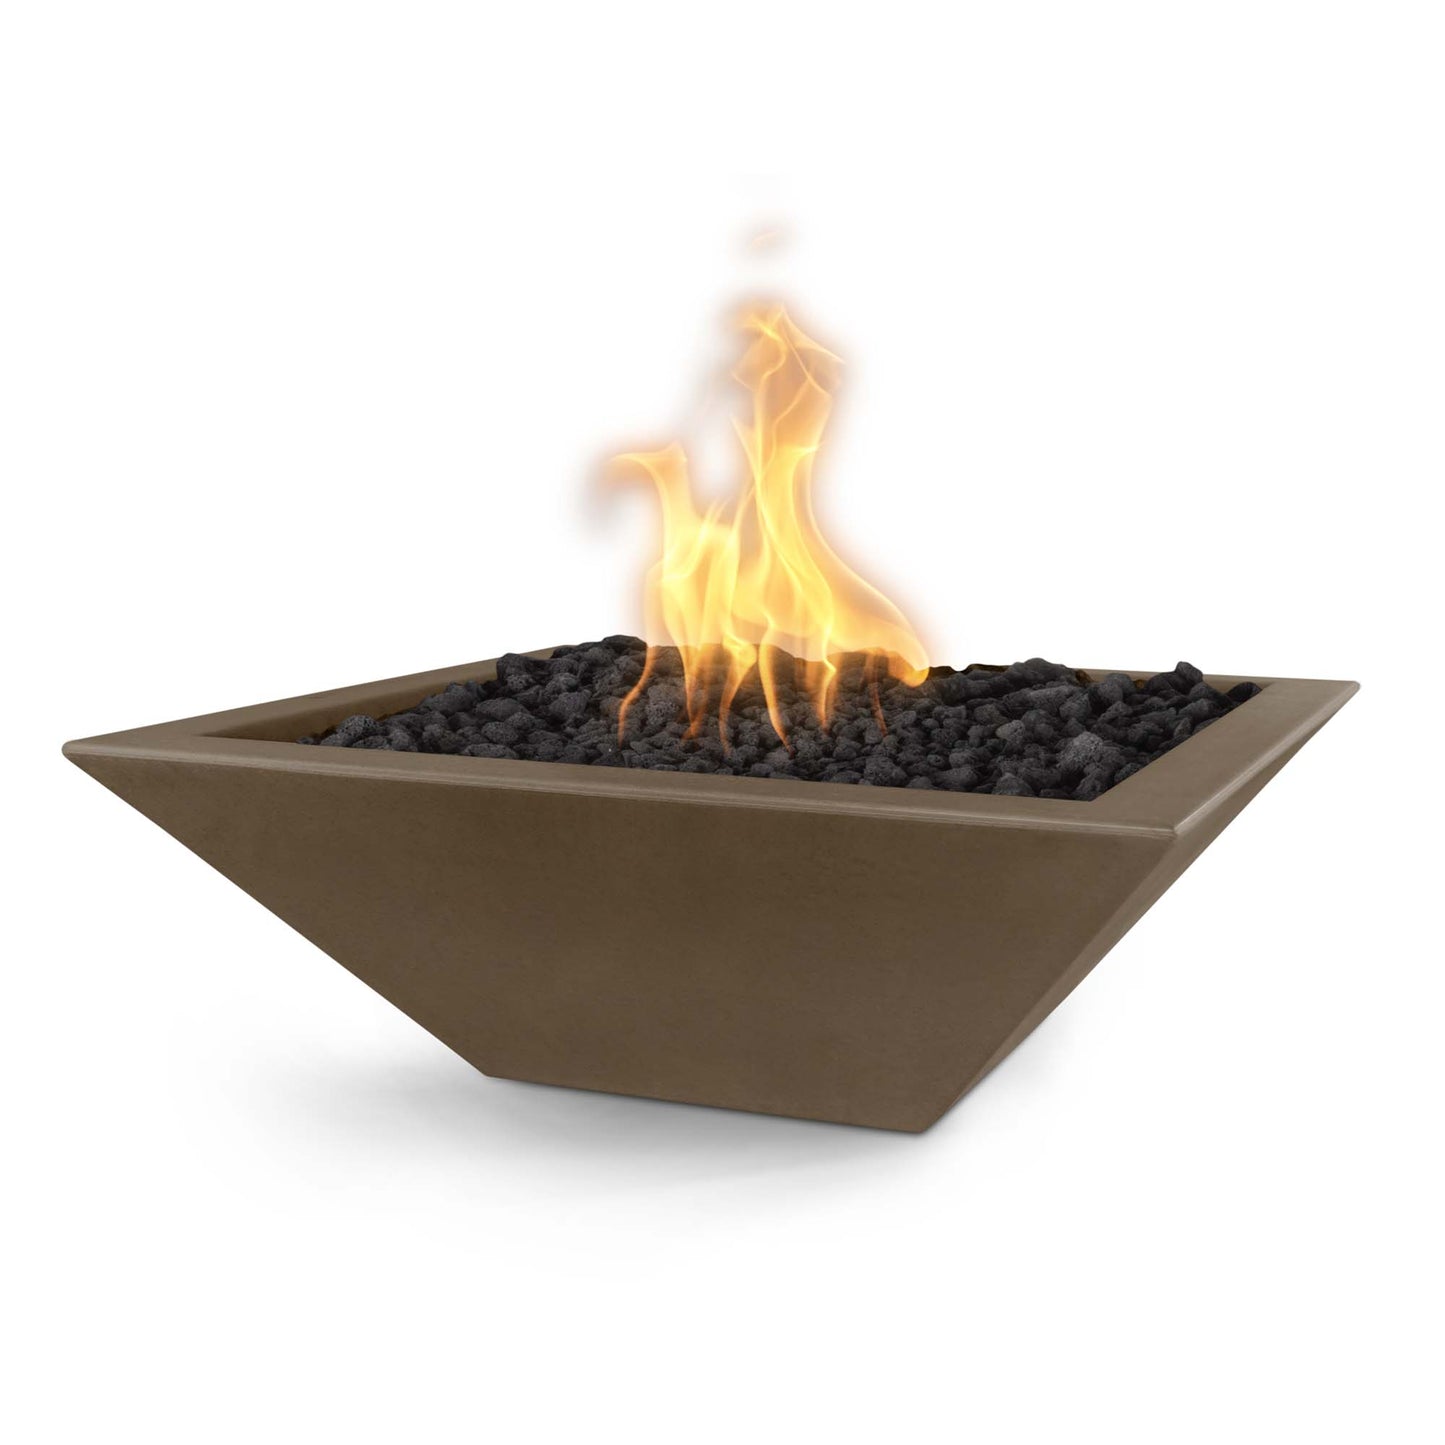 The Outdoor Plus Square Maya 30" Ash GFRC Concrete Liquid Propane Fire Bowl with Match Lit with Flame Sense Ignition